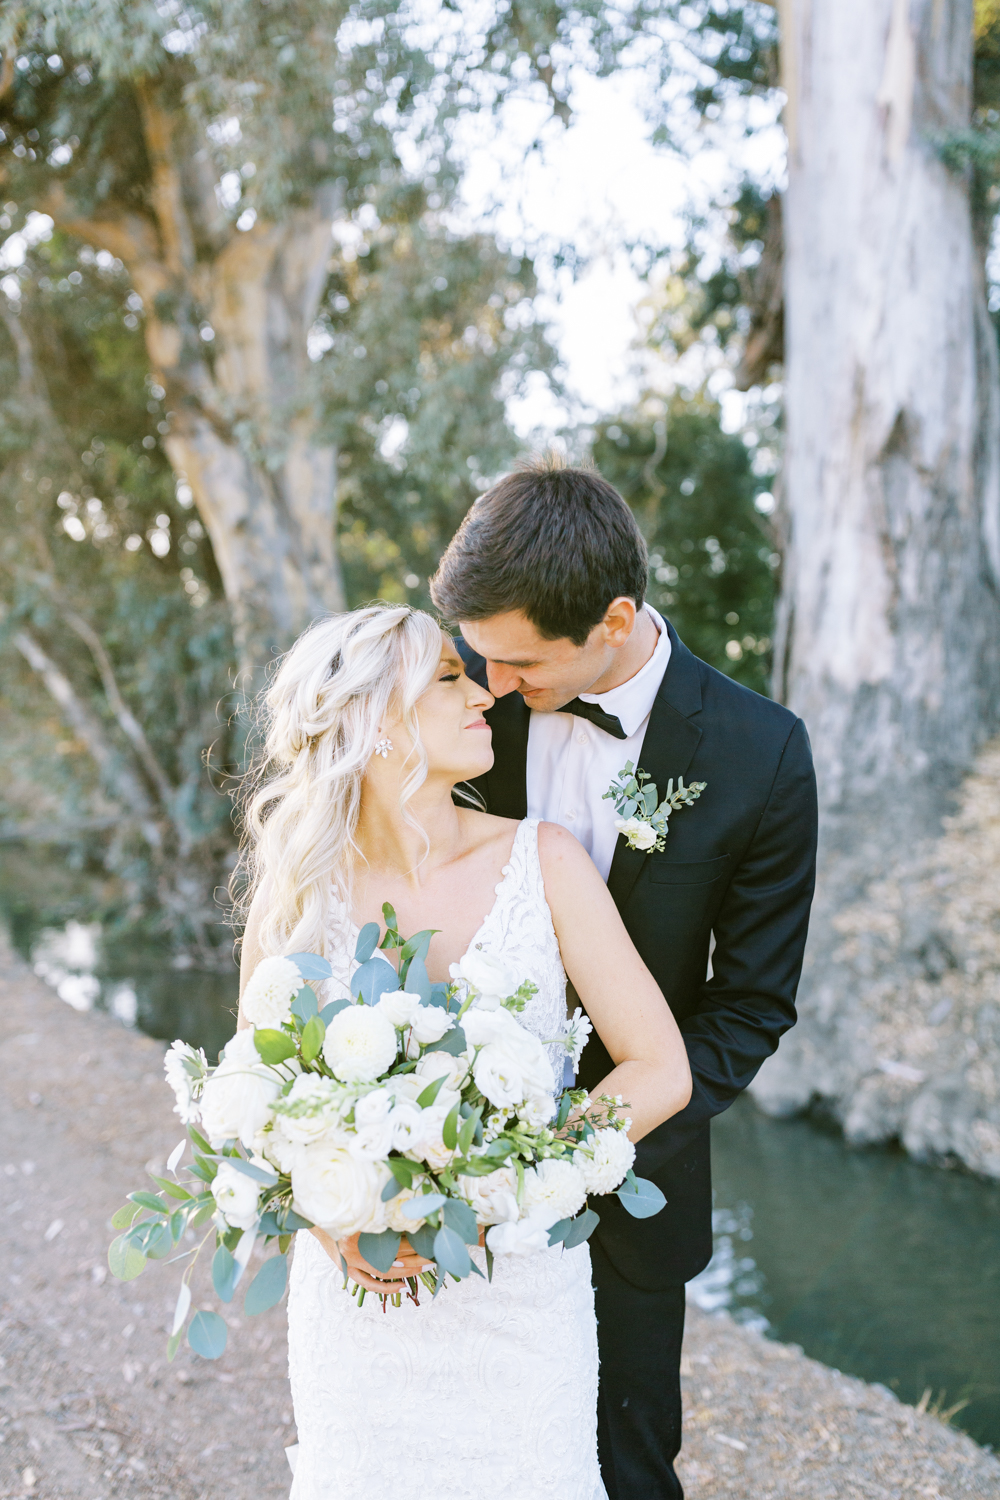 bride and groom nuzzling noses and smiling bride holding white and green wedding bouquet